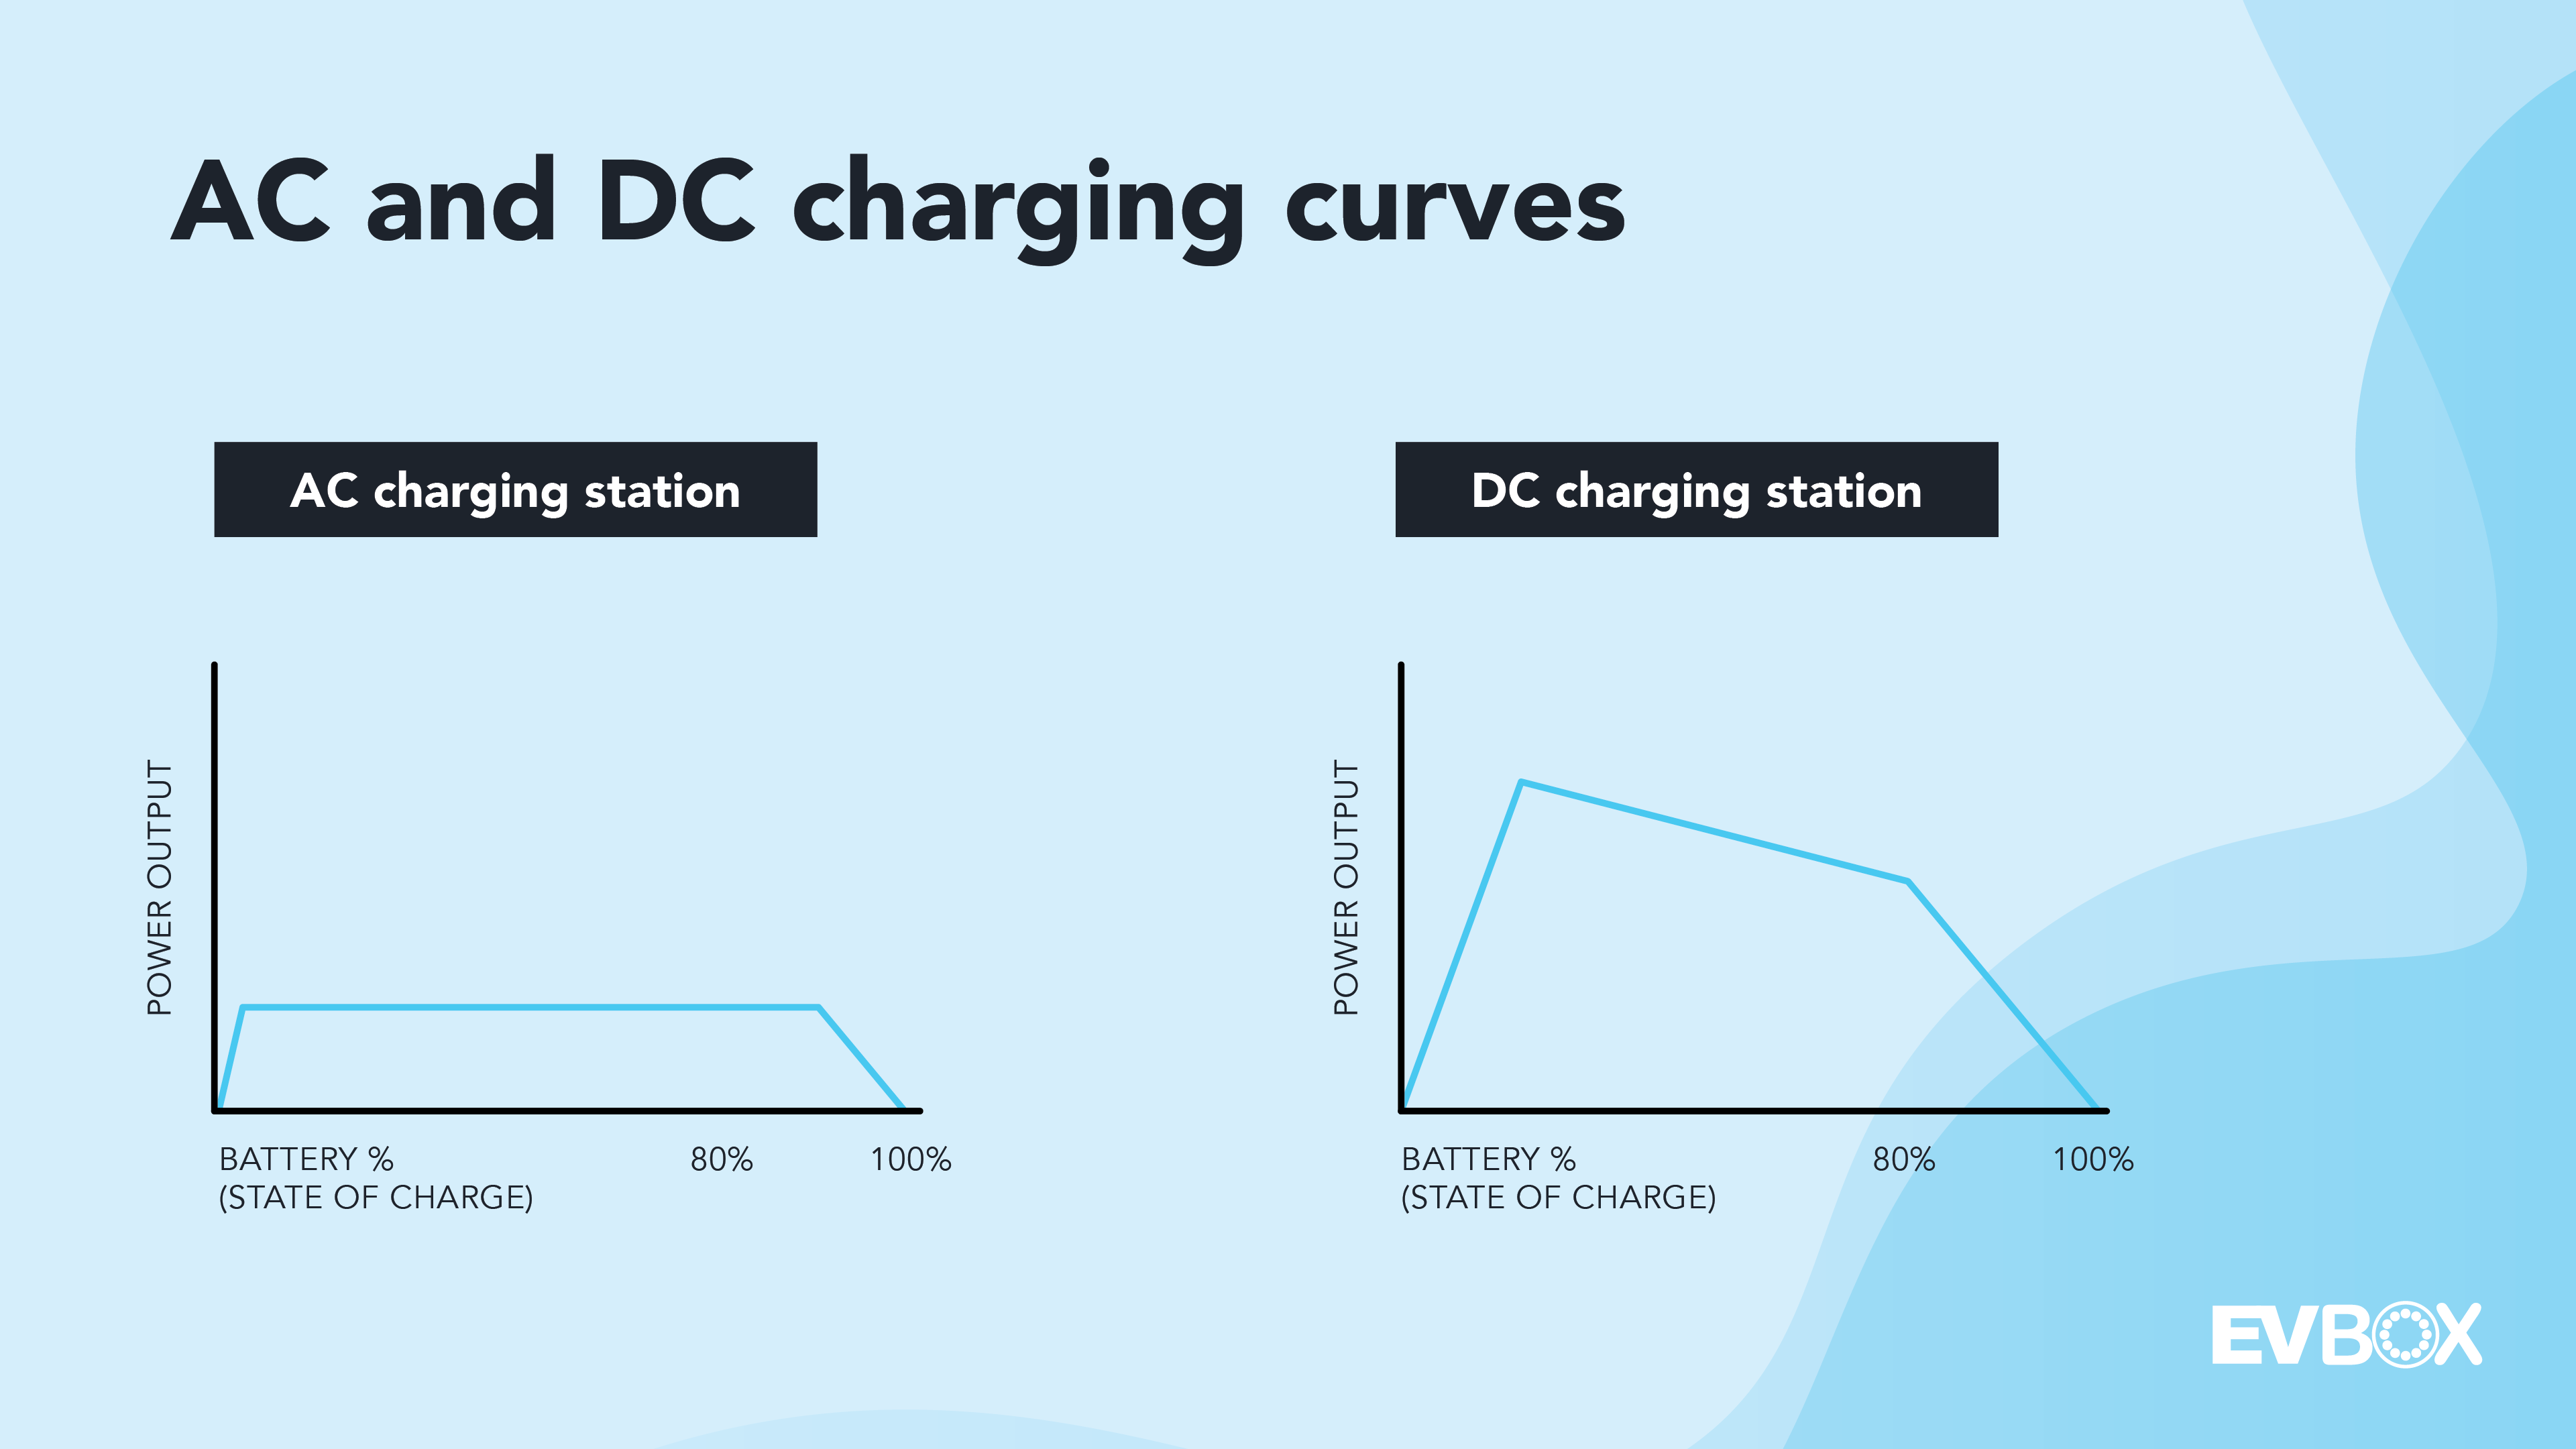 An infographic explaining the difference between AC and DC charging curves in a charging station.